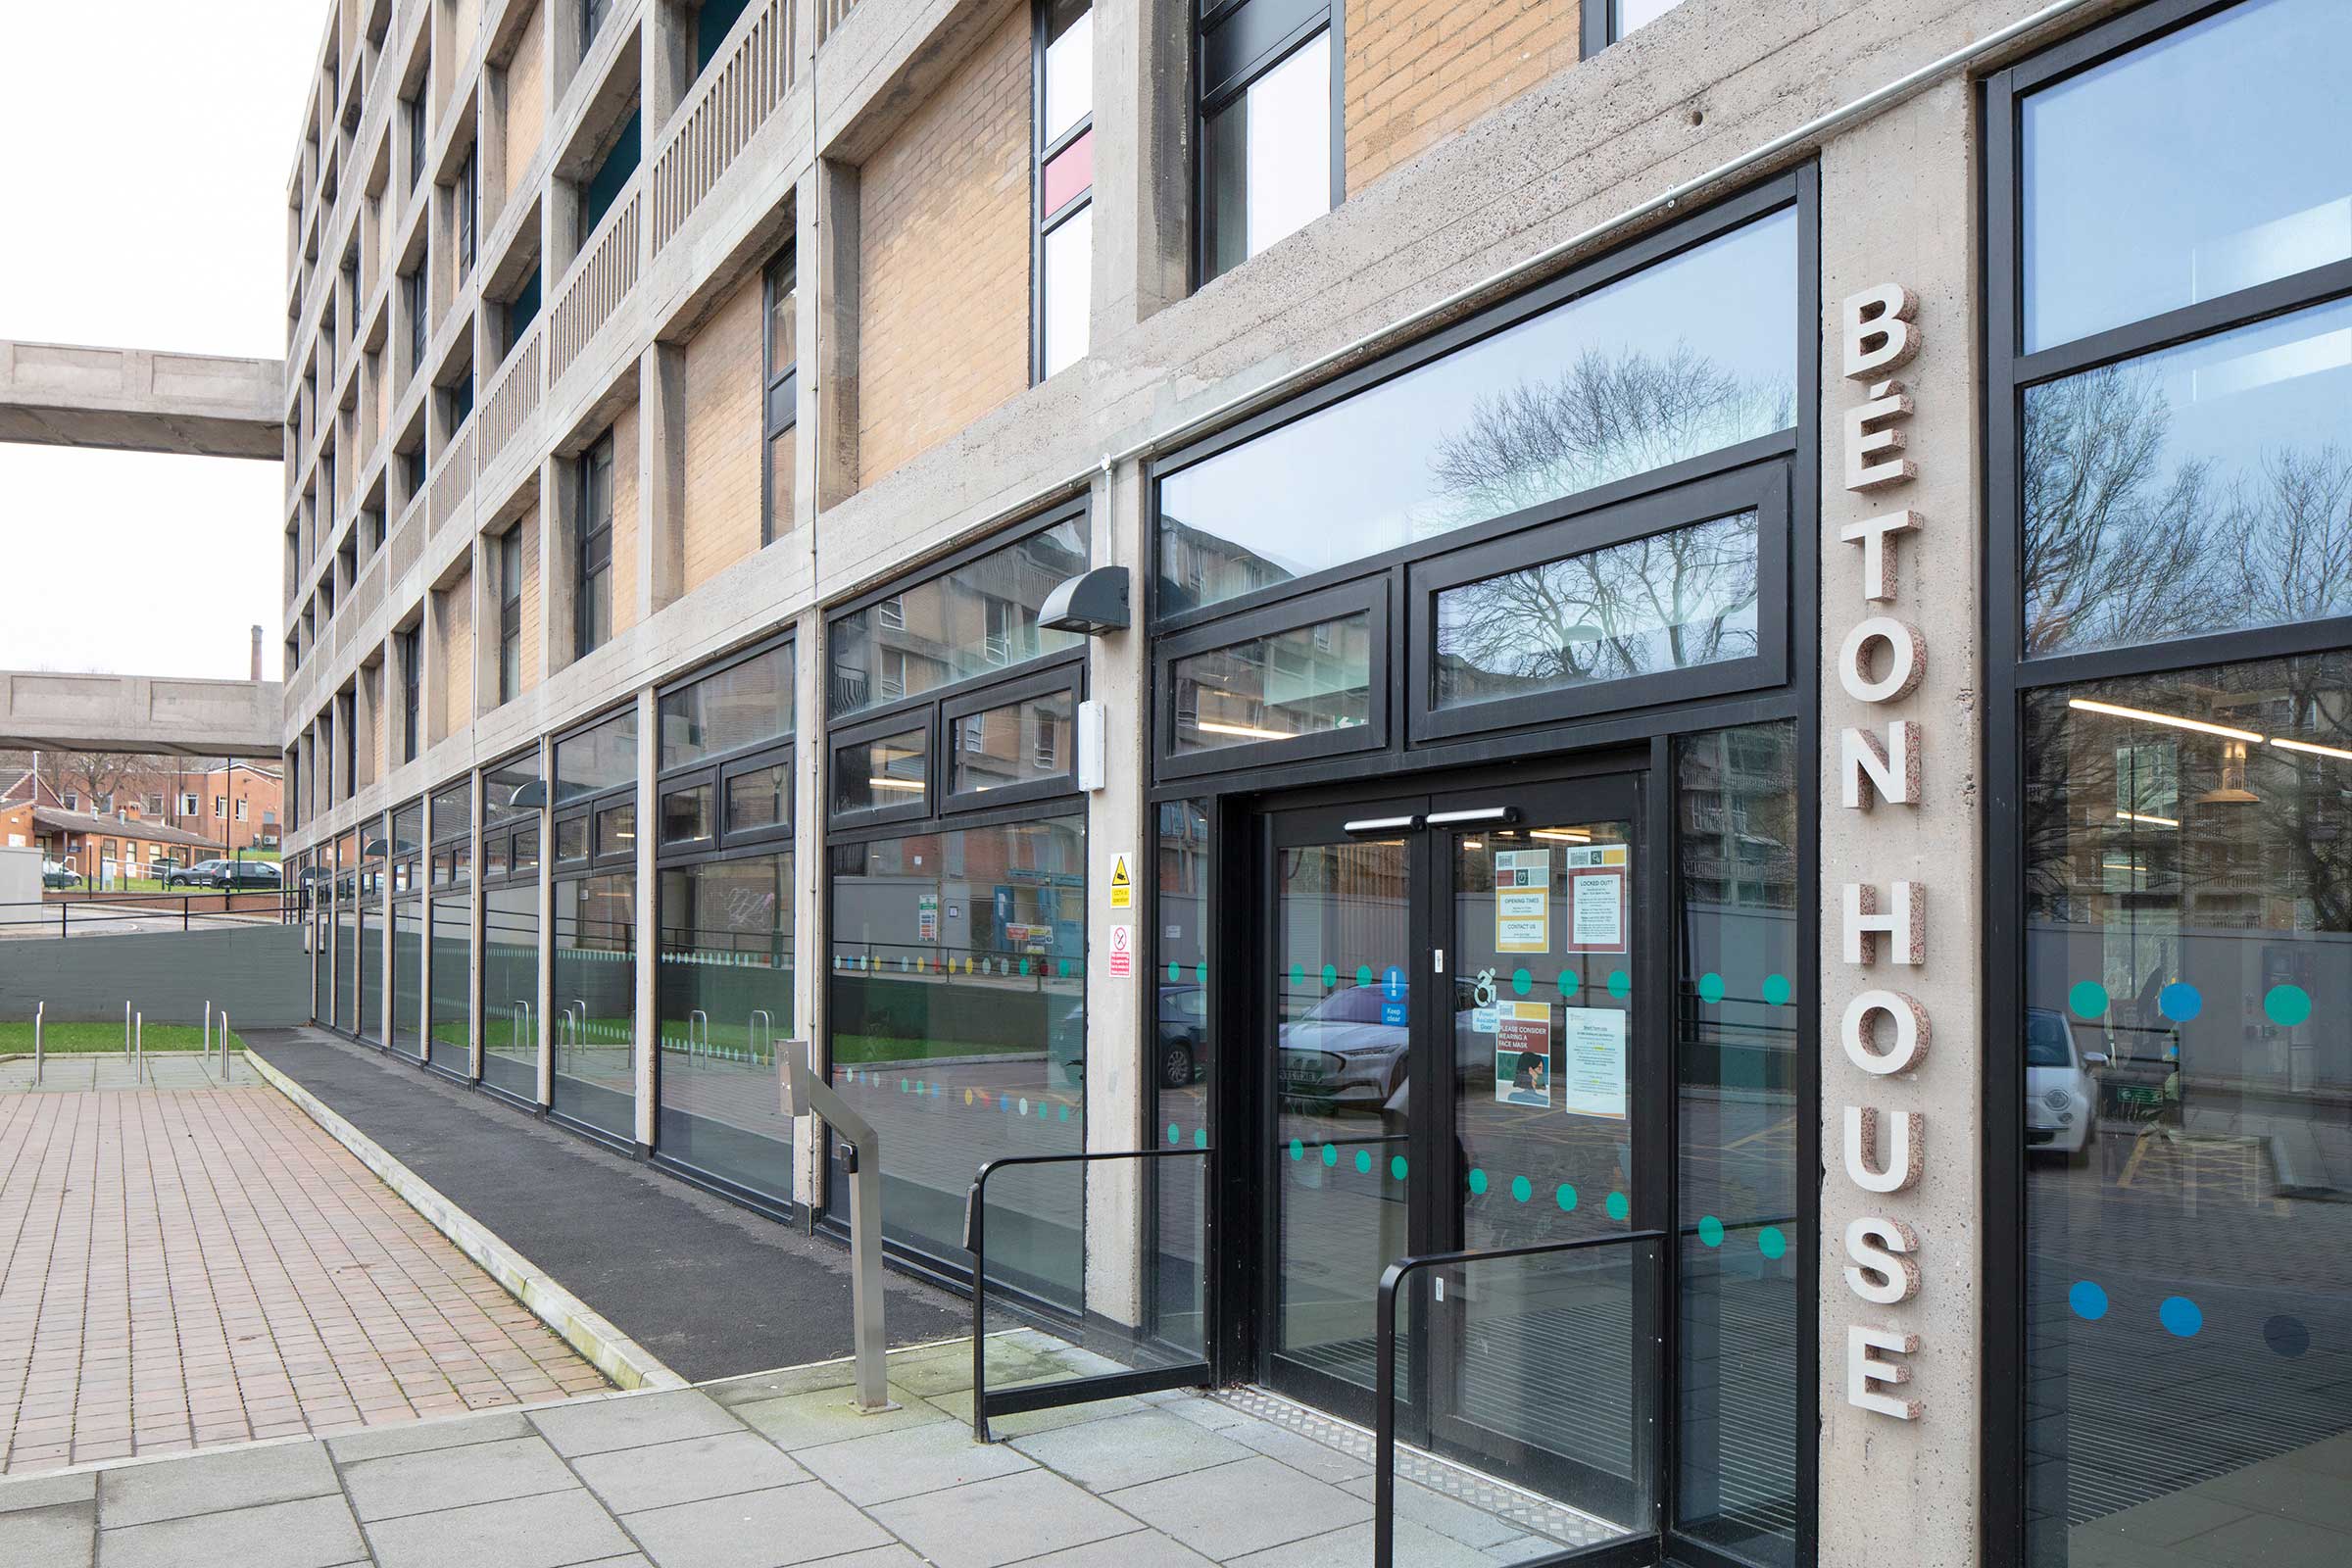 An image of an apartment block with concrete and brick walls and aluminium windows, doors and facades, There is a sign next to the entrance door which reads "Beton House",